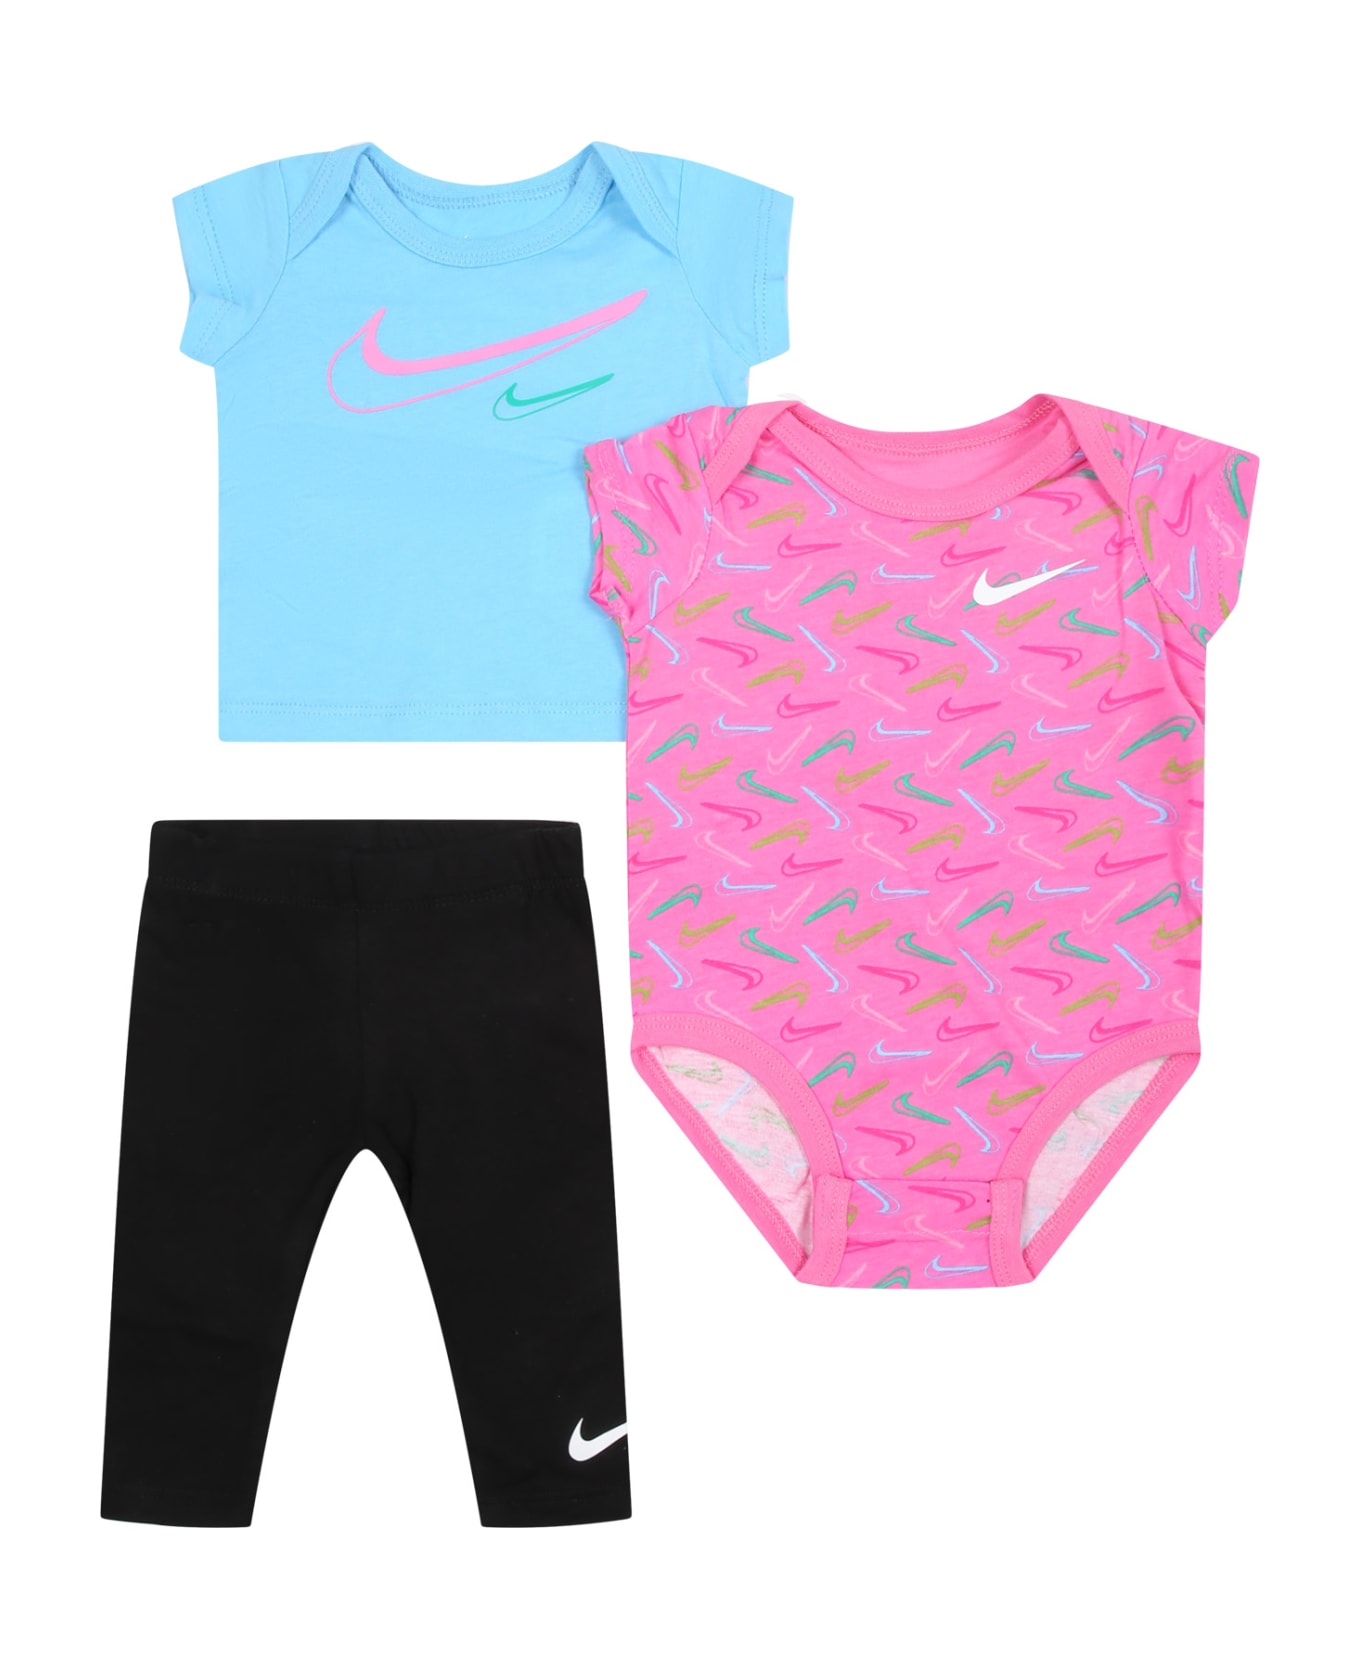 Nike Multicolor Suit For Baby Girl With Swoosh - Multicolor